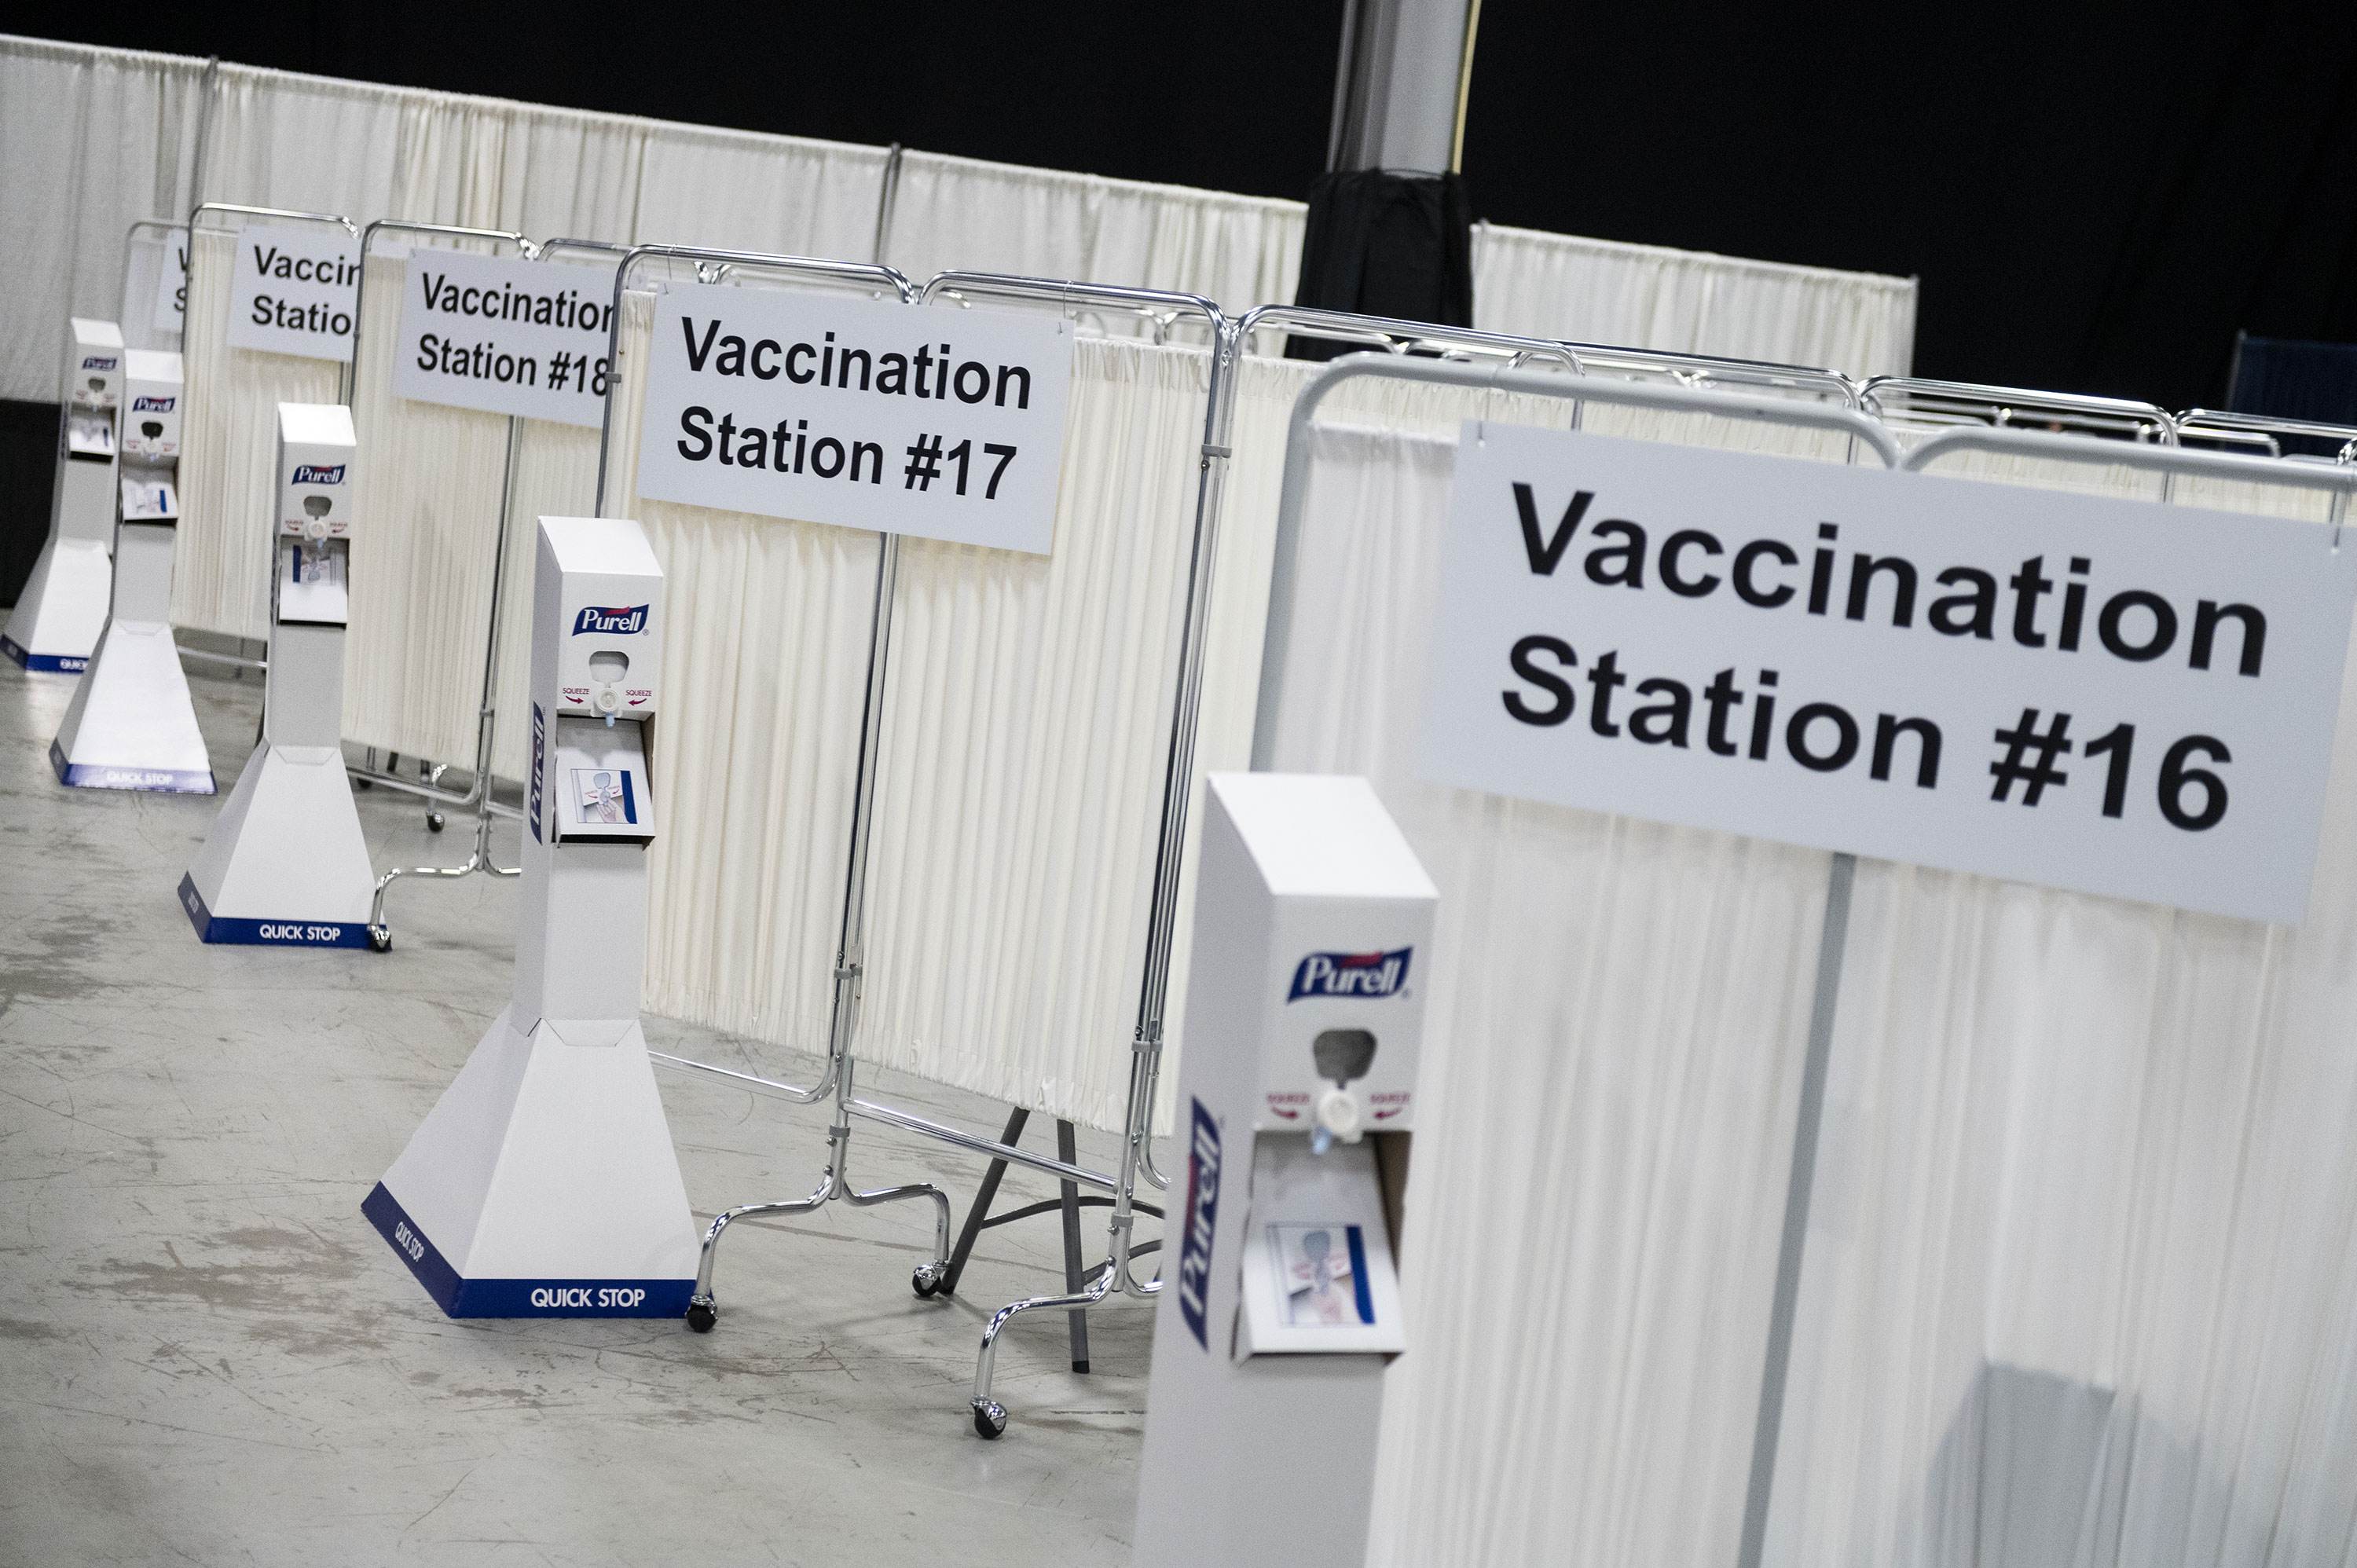 New Jersey administered more than 1 million Covid-19 vaccines, says governor